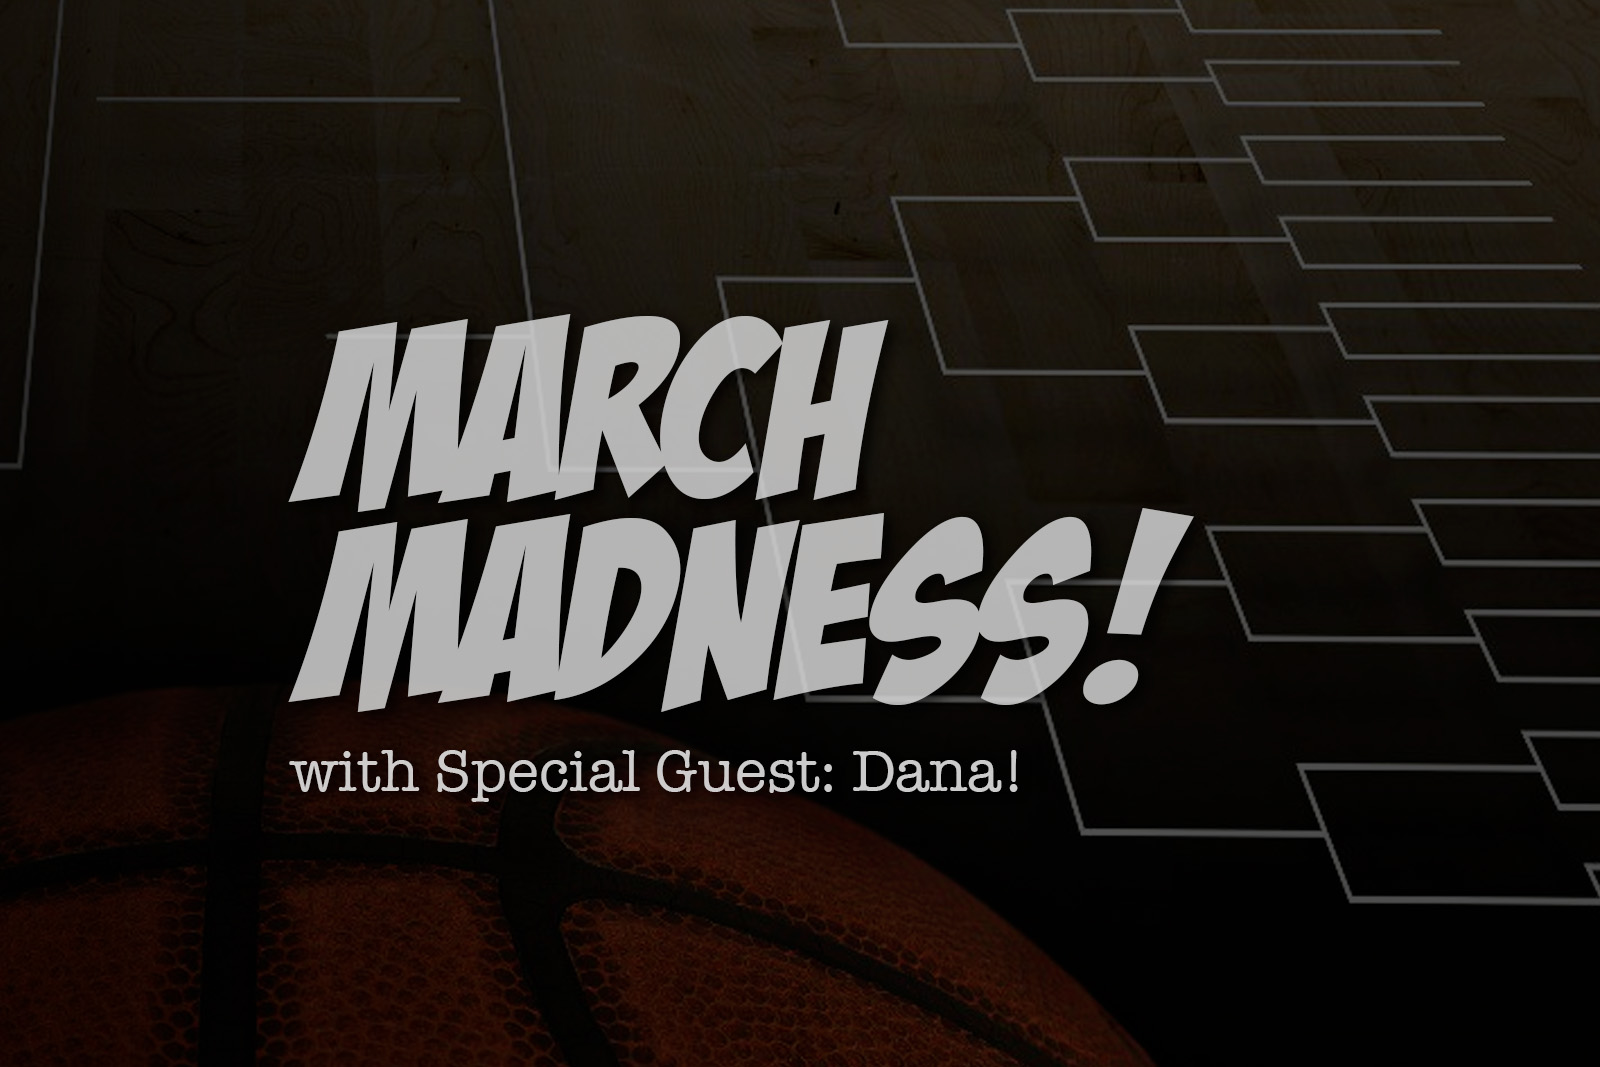 March Madness with Special Guest Dana!